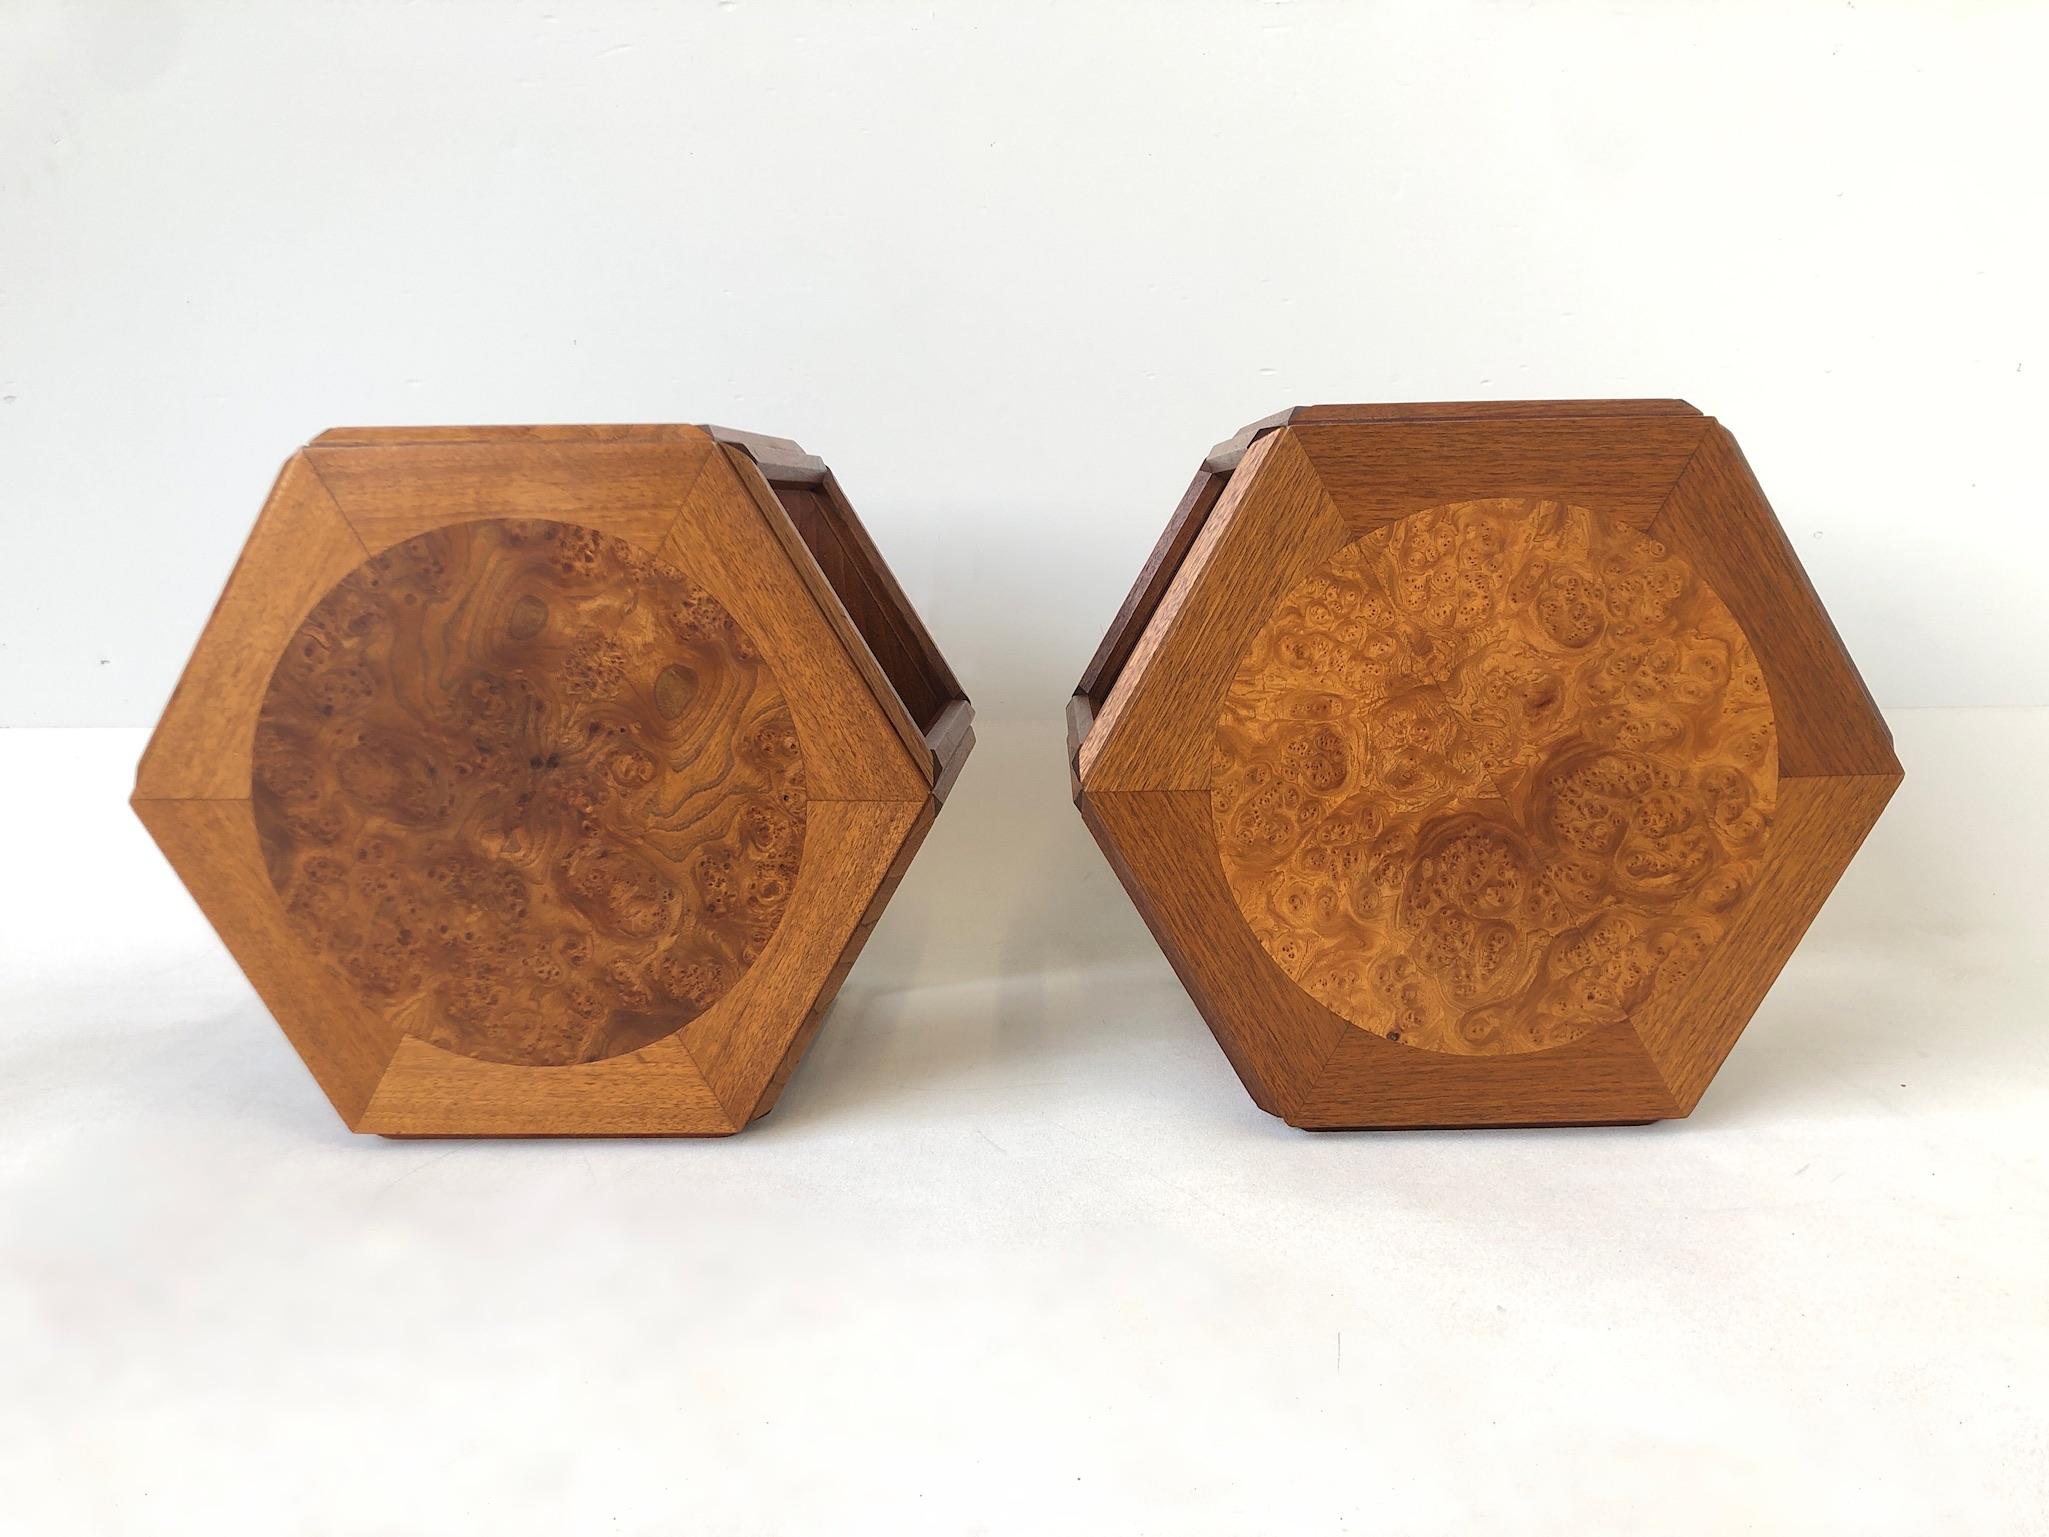 Stained Walnut and Burl Wood Hexagonal Side Tables by John Keal for Brown Saltman